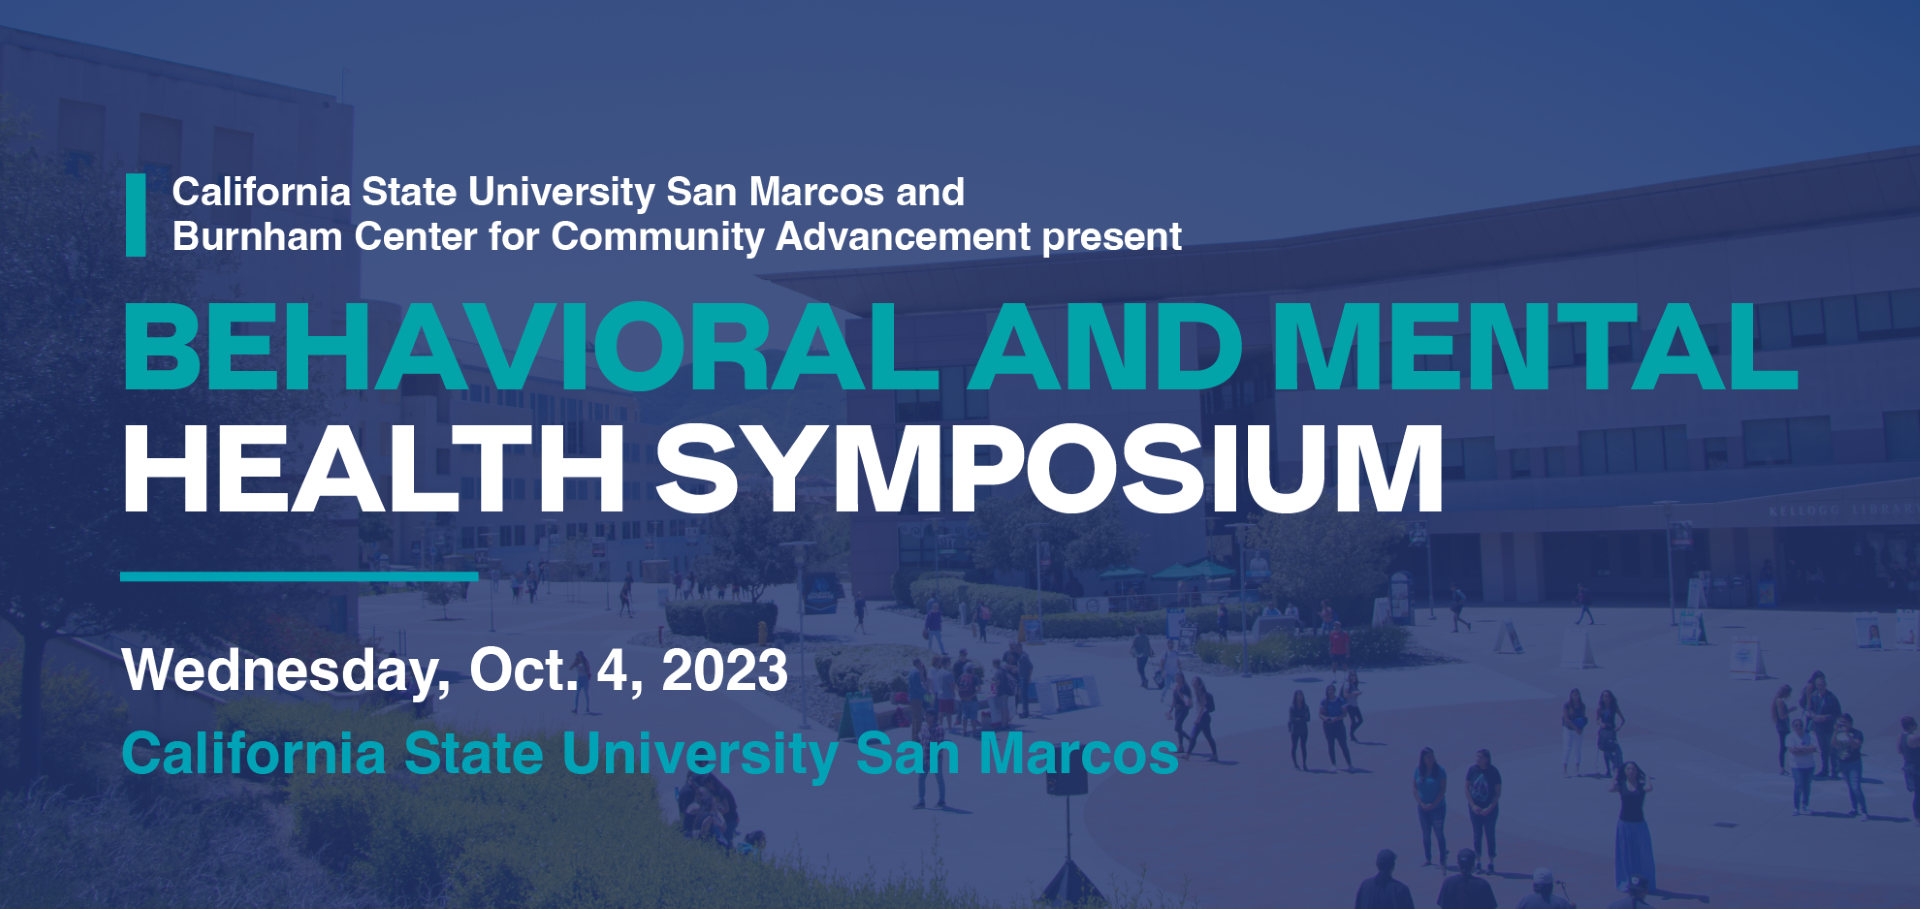 Behavioral and Mental Health Banner - Wednesday, Oct. 4, 2023 - California State University San Marcos